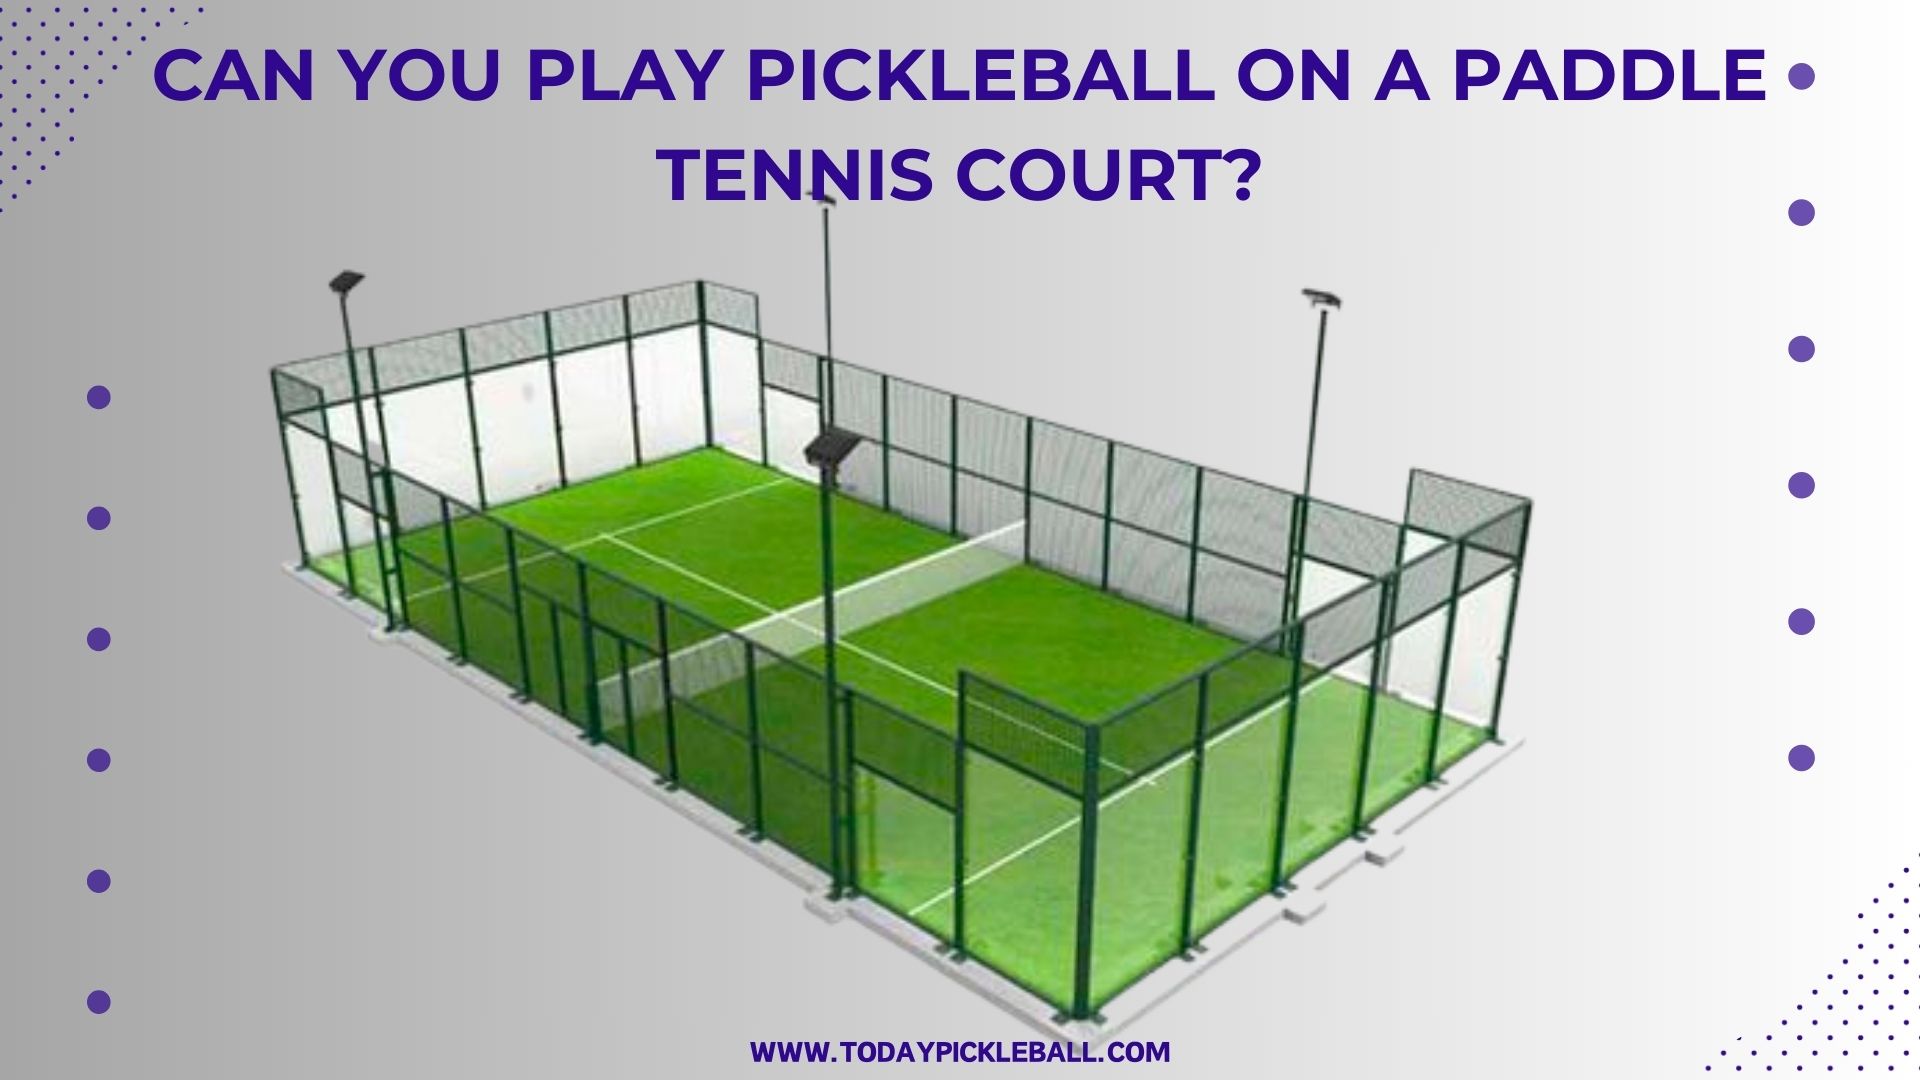 Can You Play Pickleball on a Paddle Tennis Court?